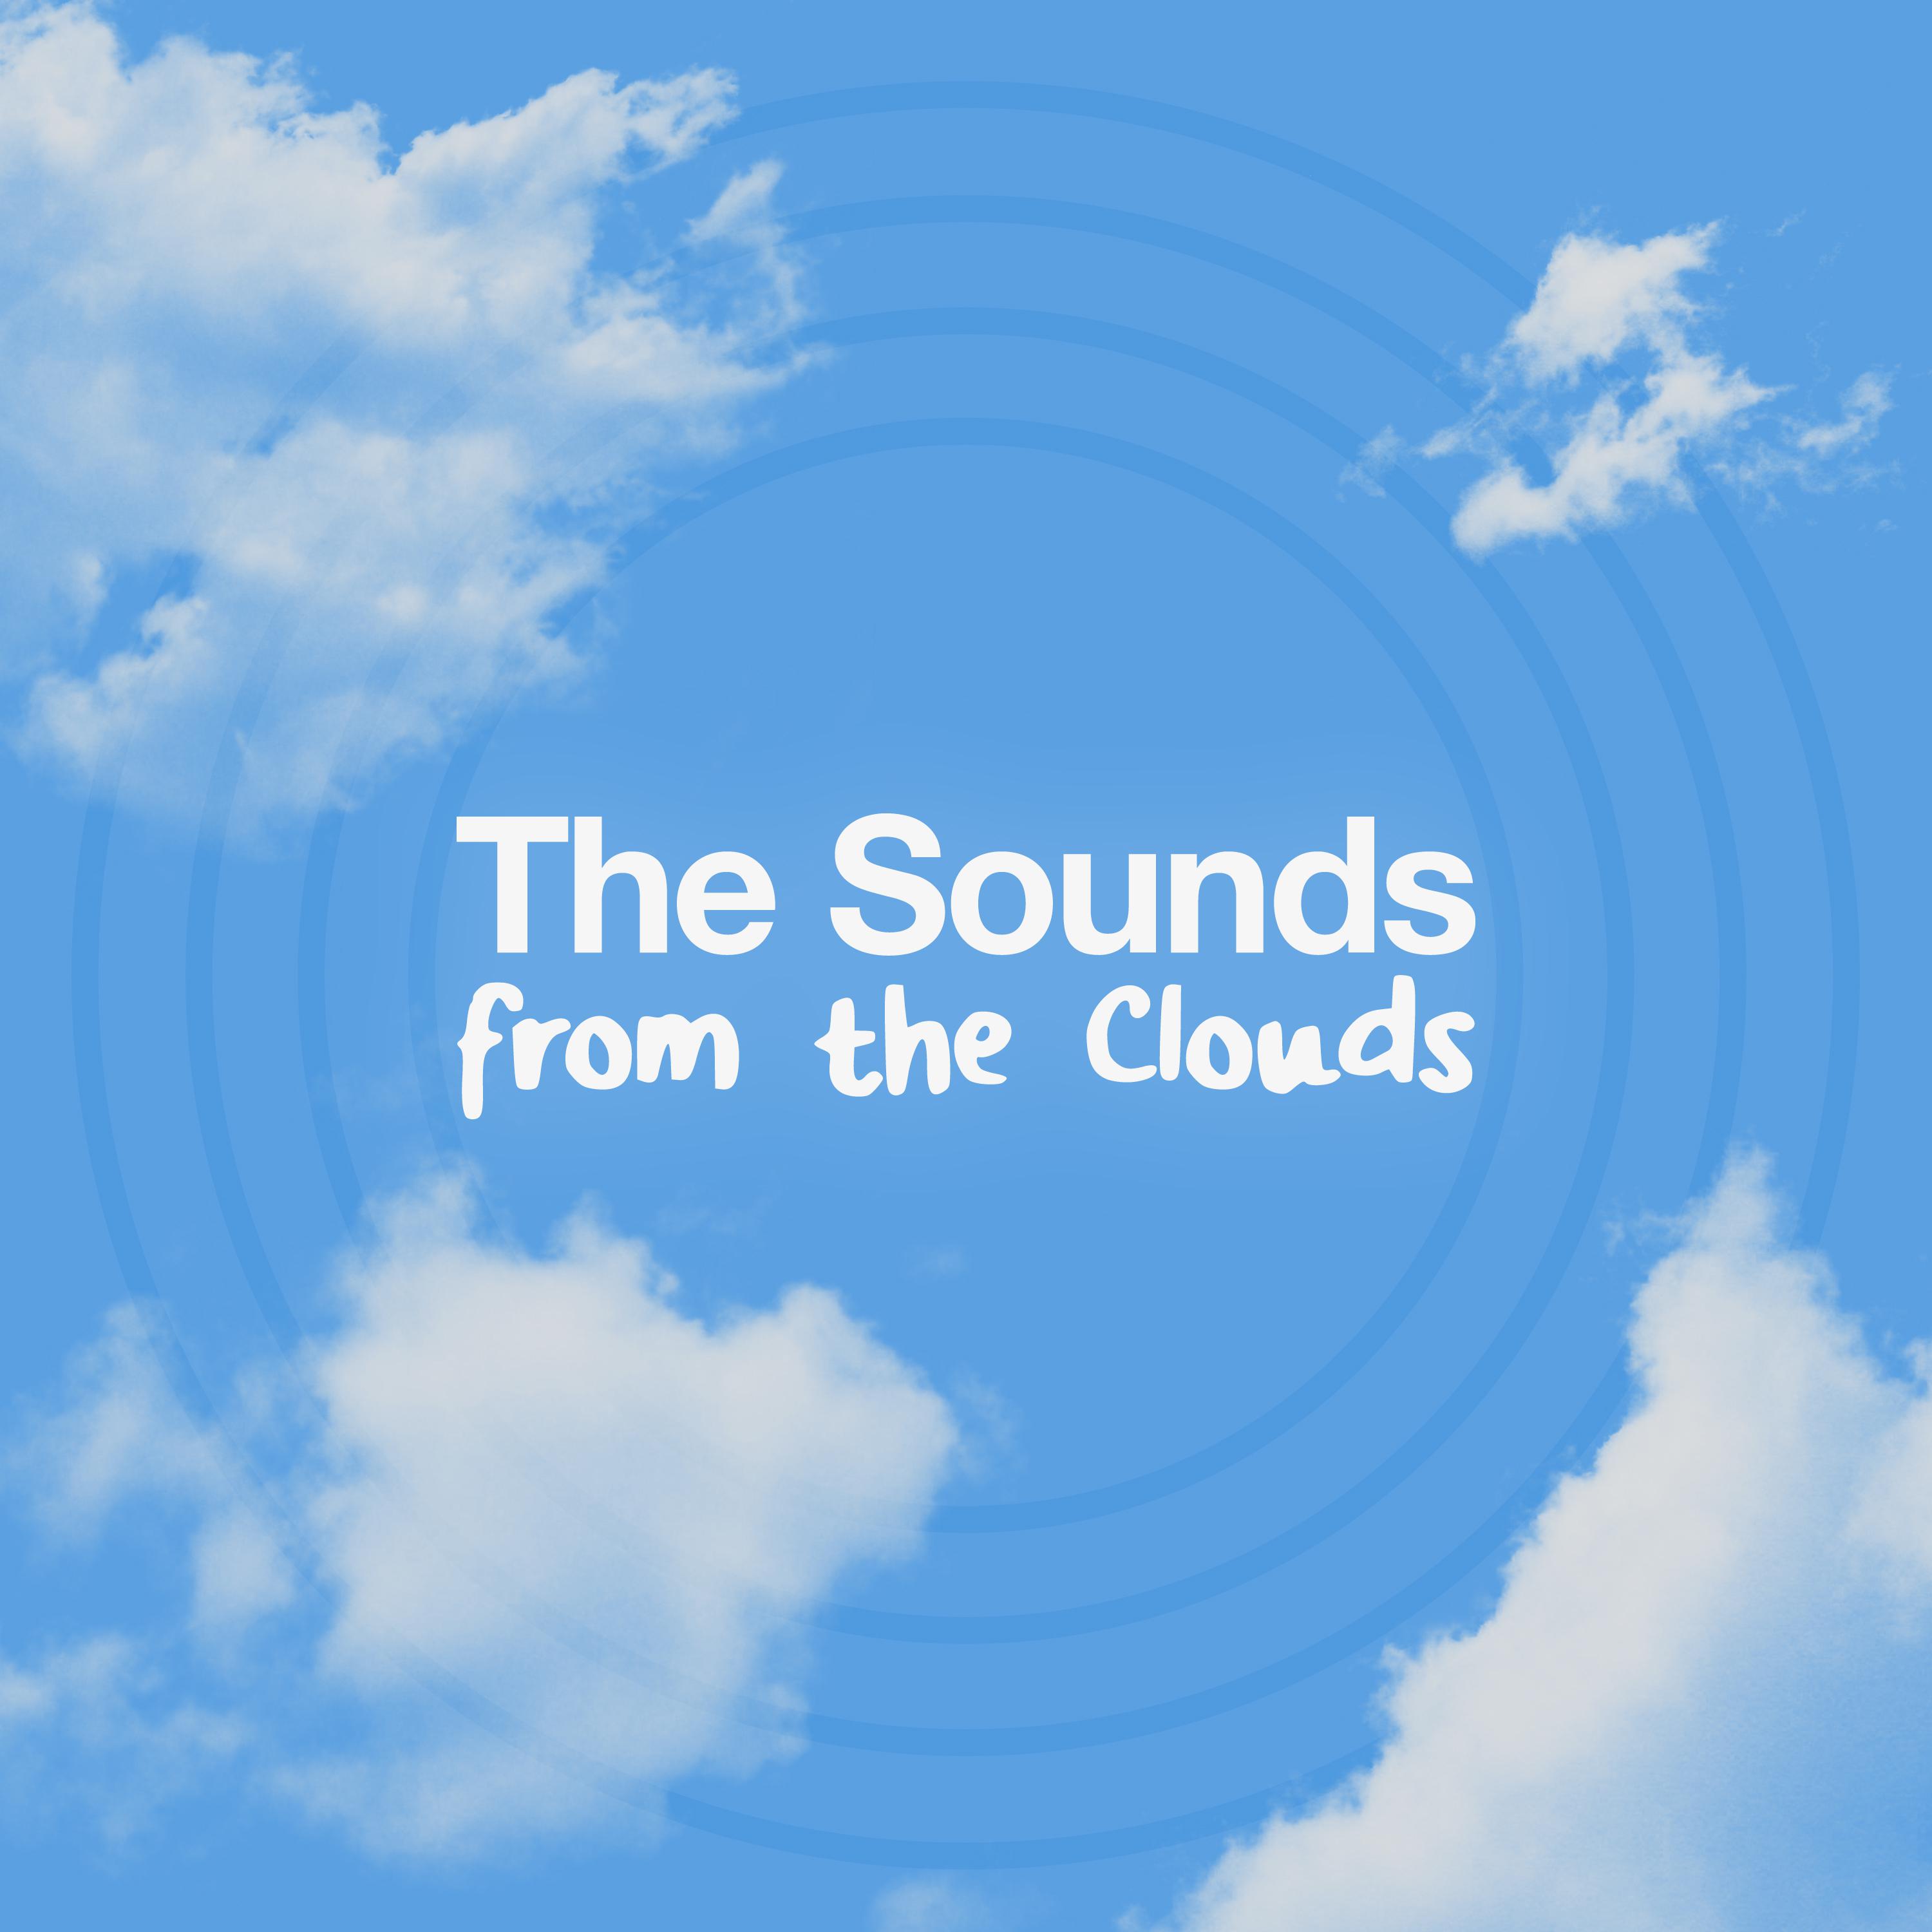 The Sounds from the Clouds